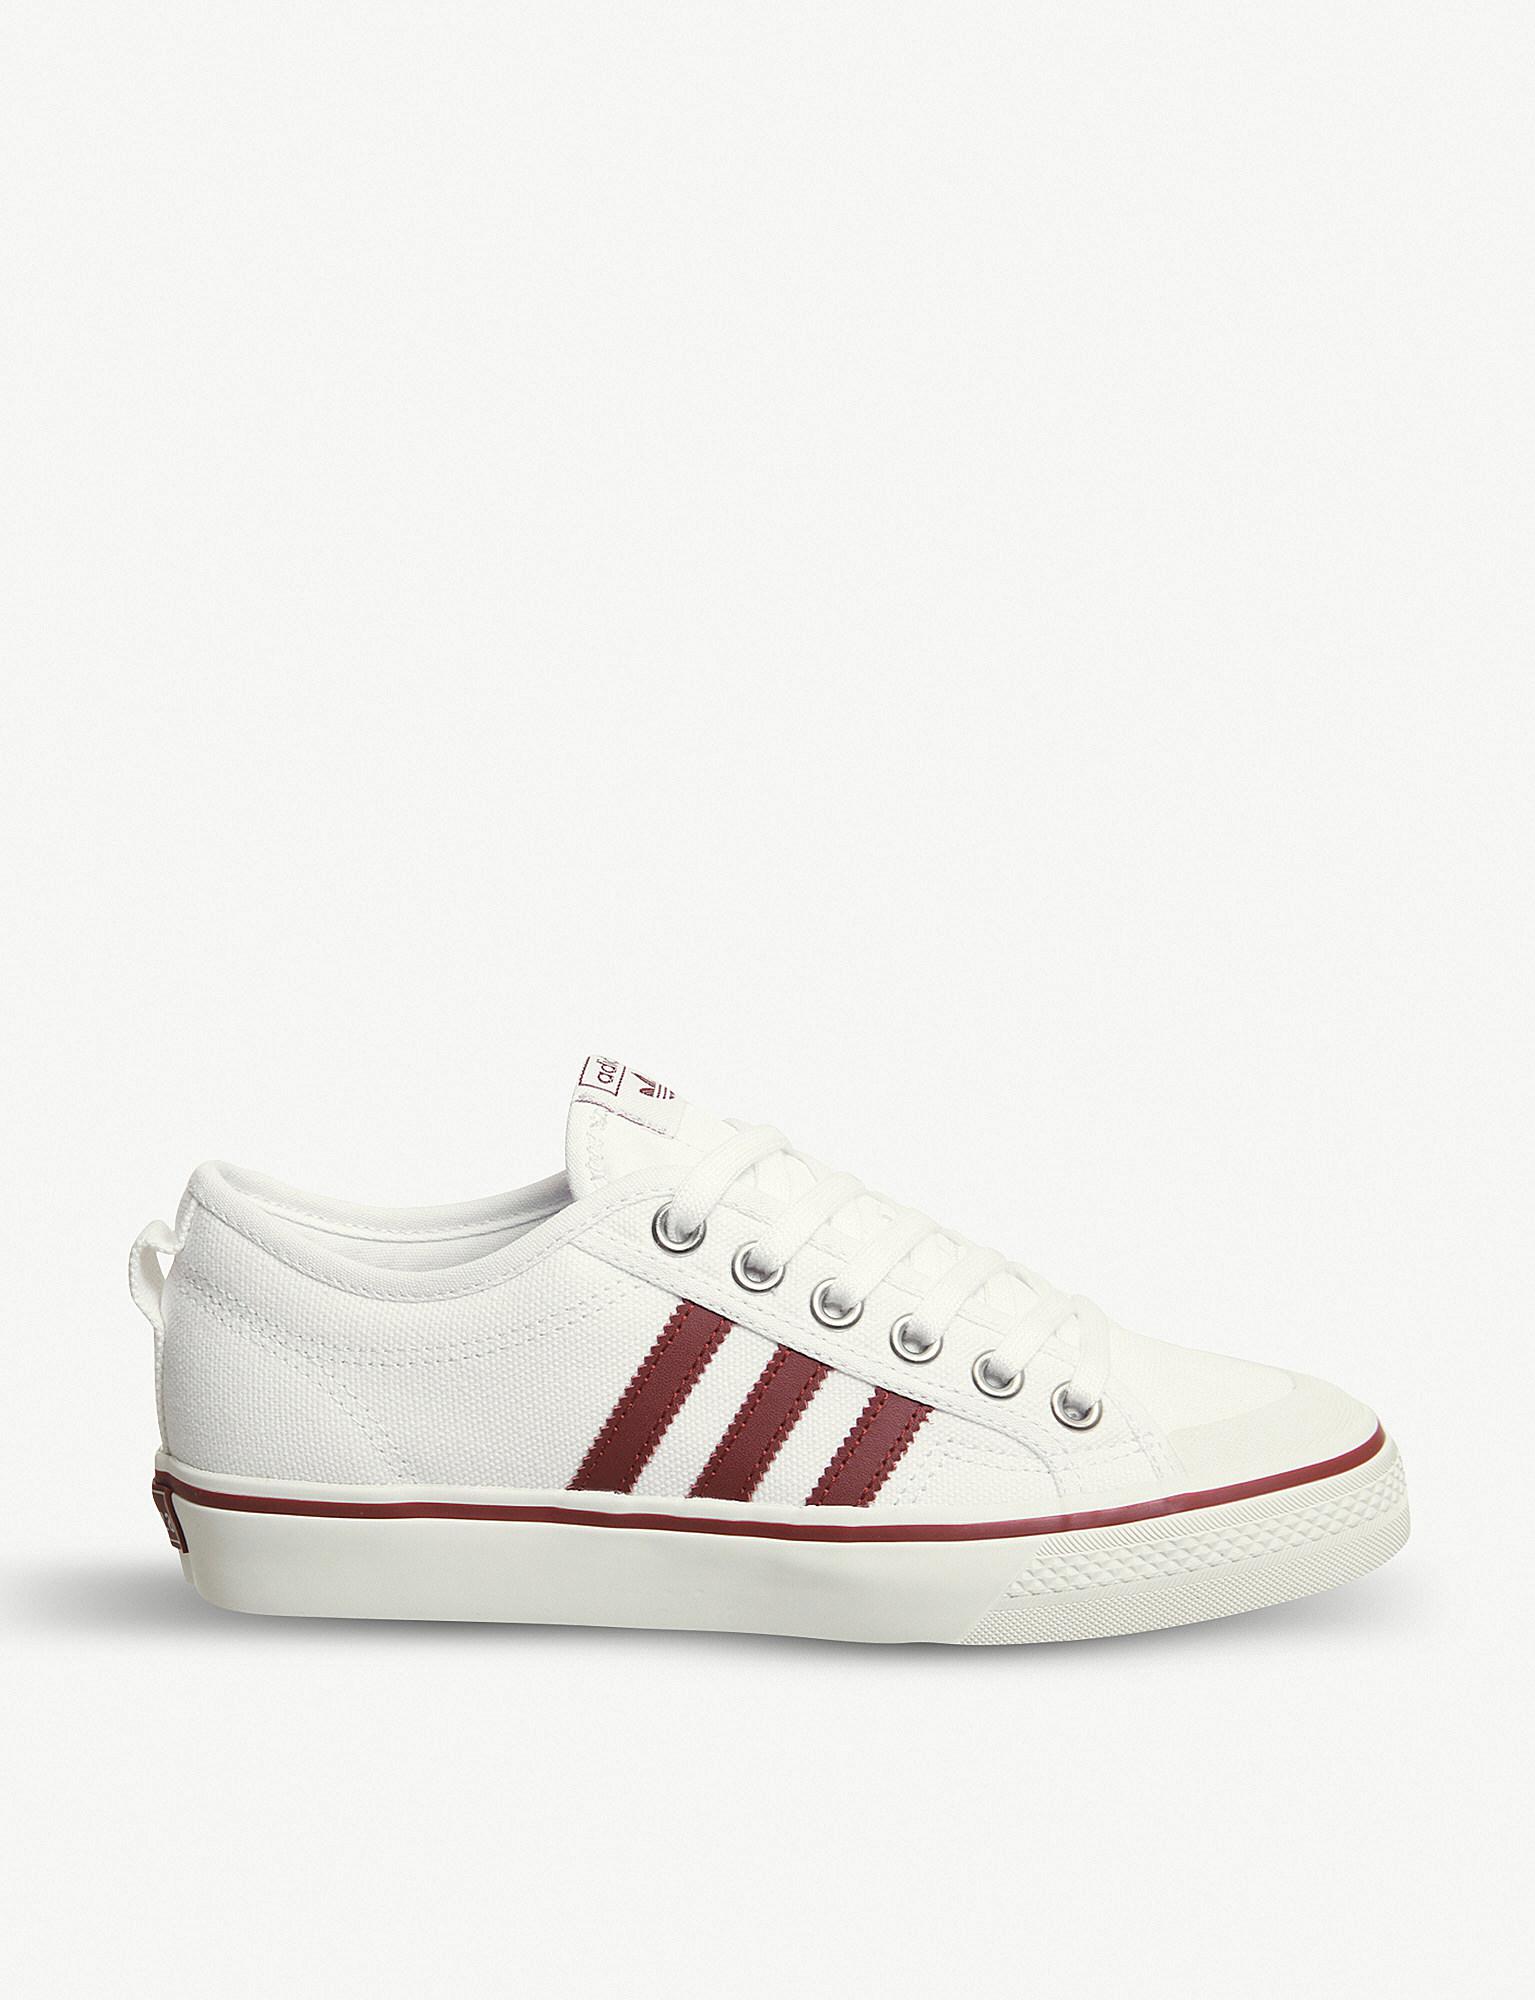 adidas trainers canvas